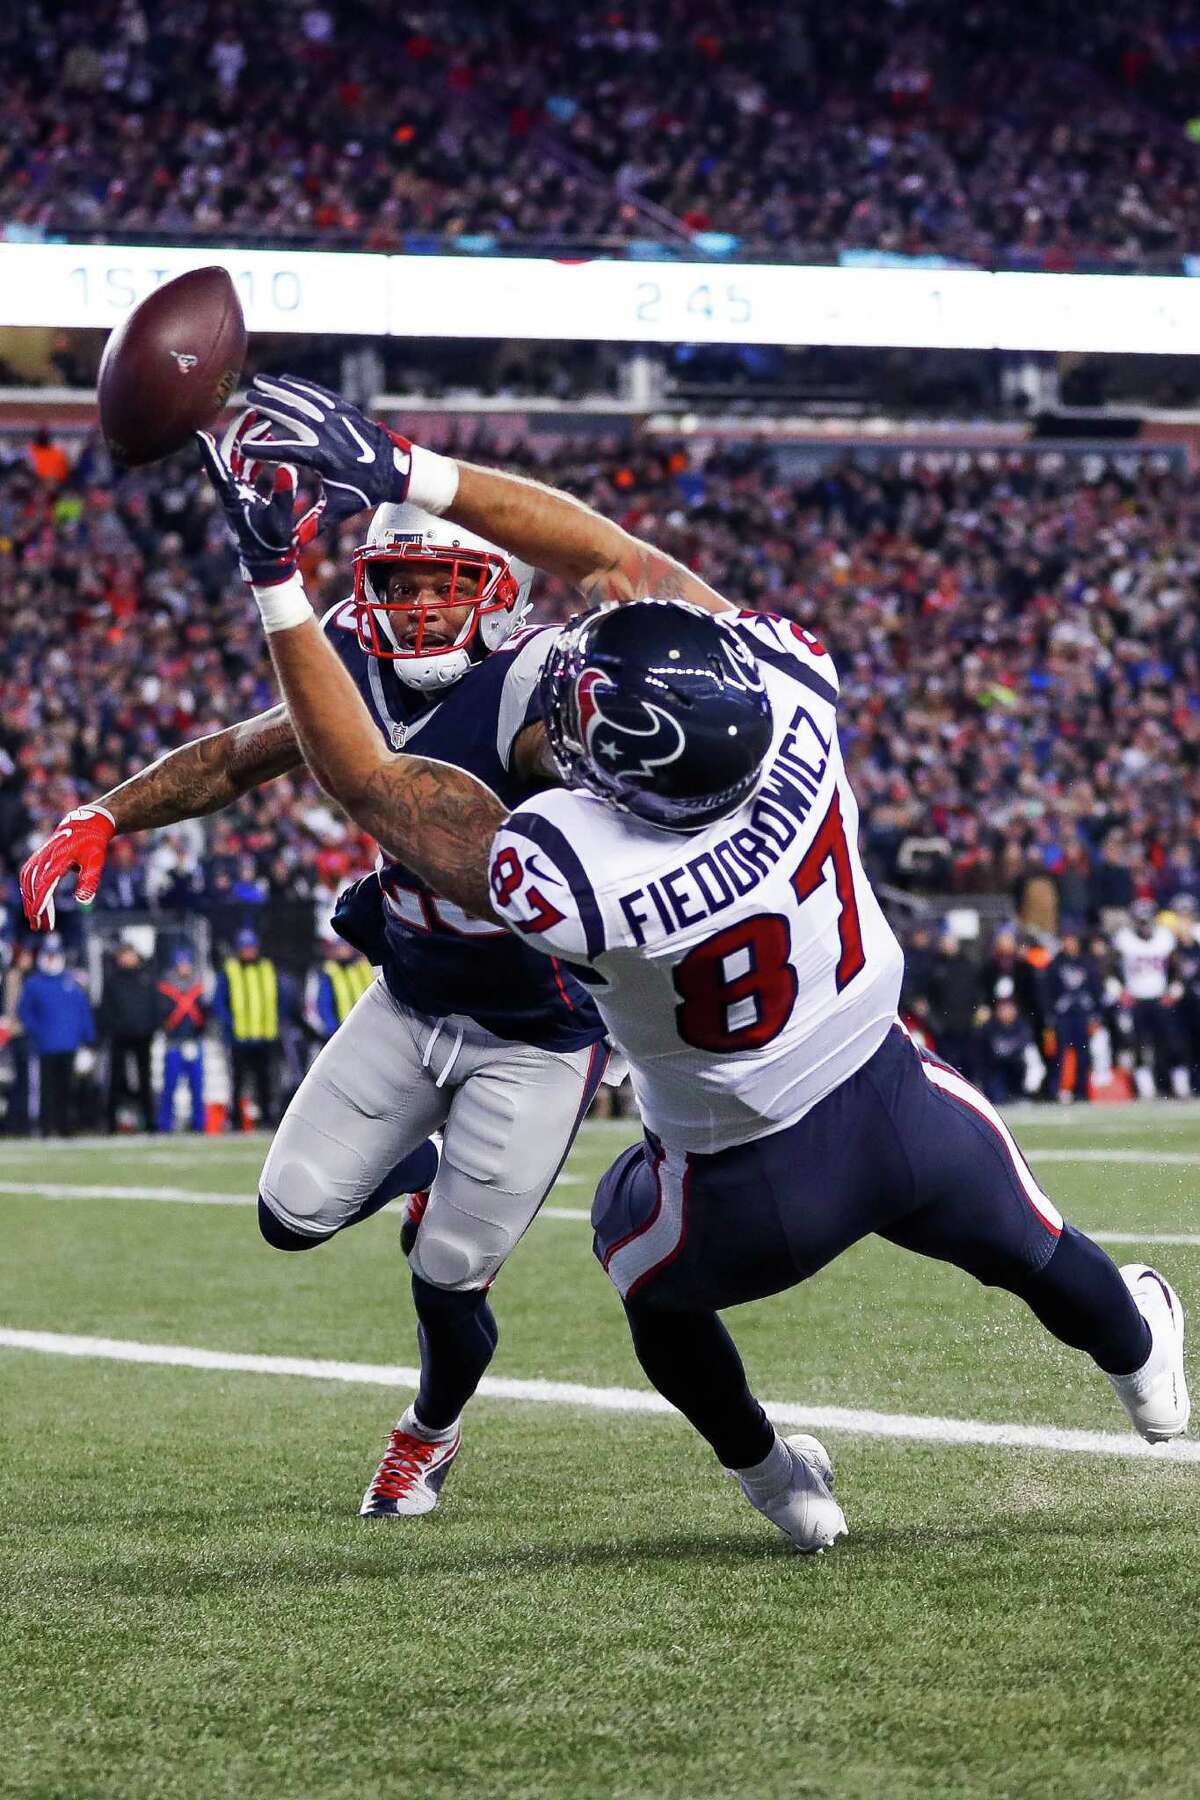 Houston Texans tight end C.J. Fiedorowicz (87) misses a touchdown pass while being defended by New England Patriots strong safety Patrick Chung (23) during the first quarter of an NFL divisional playoff game at Gillette Stadium, Saturday, January 14, 2017. ( Karen Warren / Houston Chronicle )